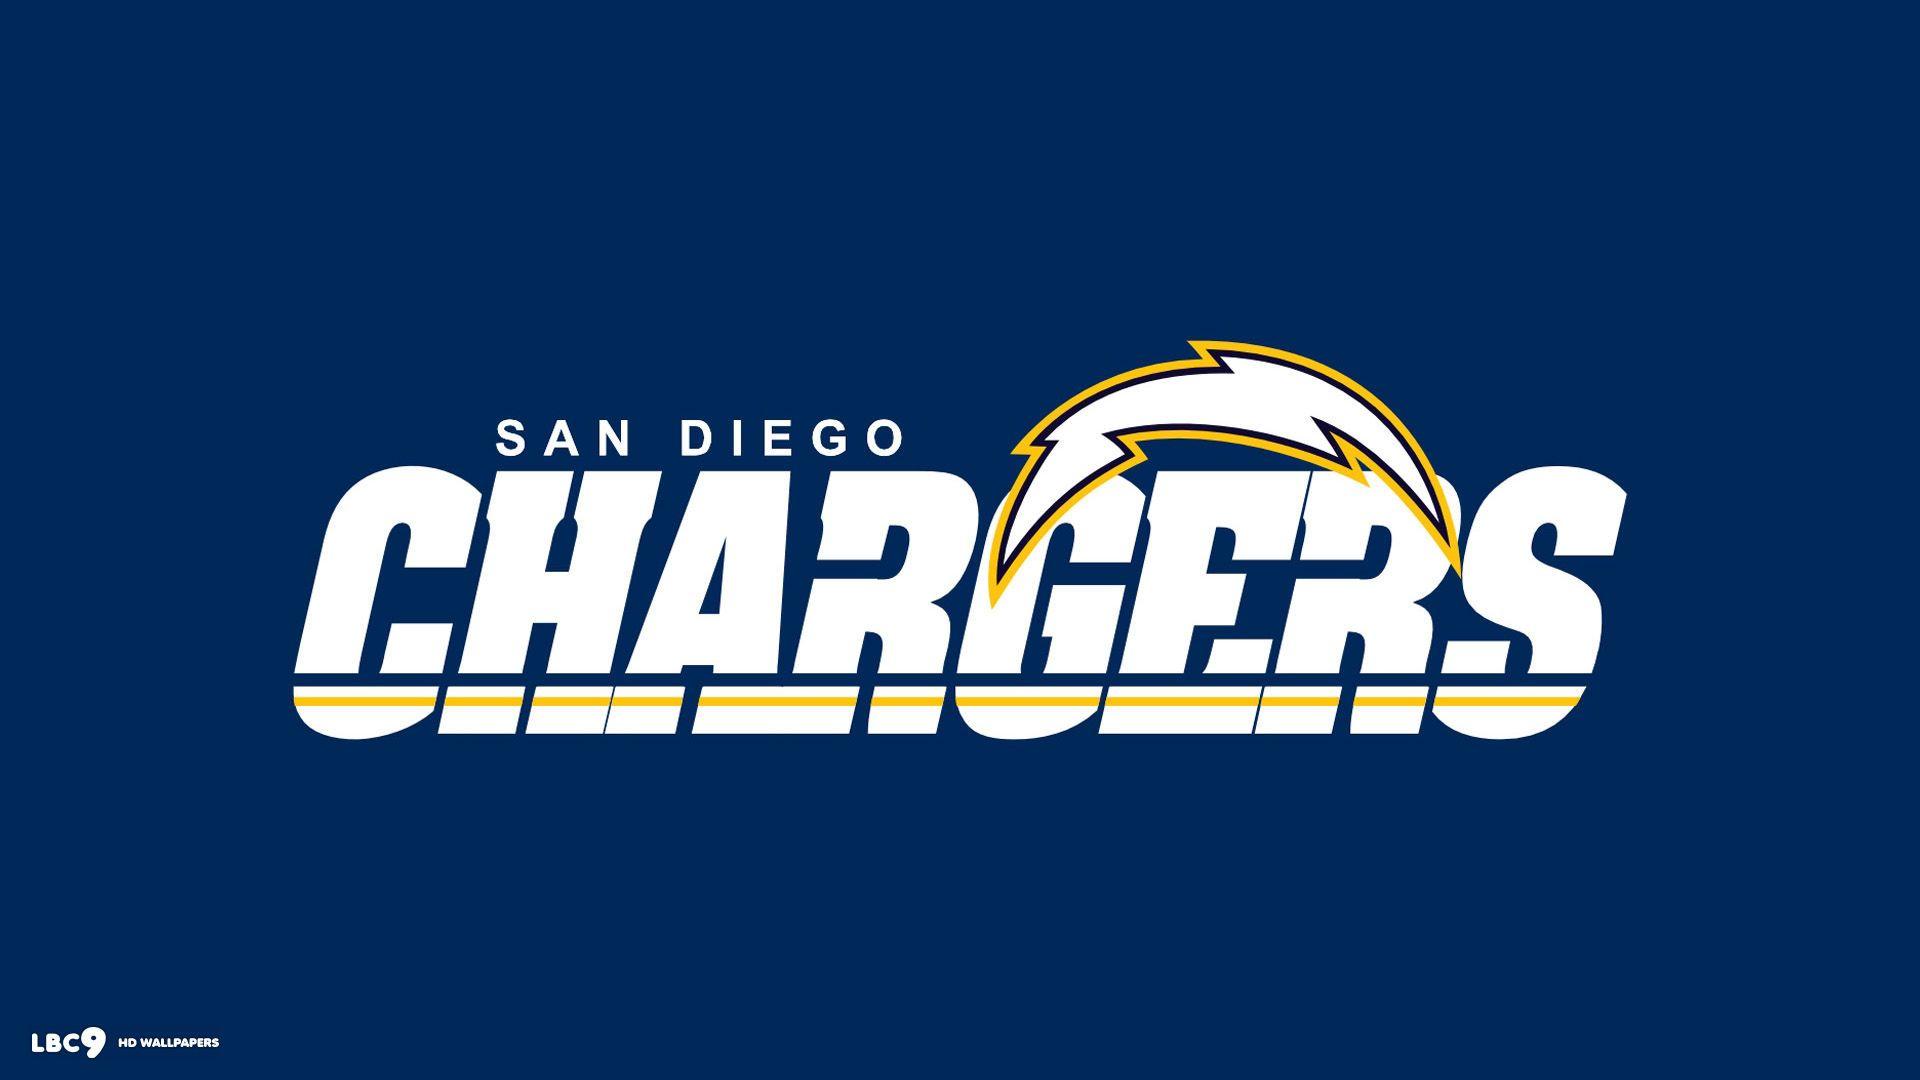 San Diego Chargers Wallpaper HD Download